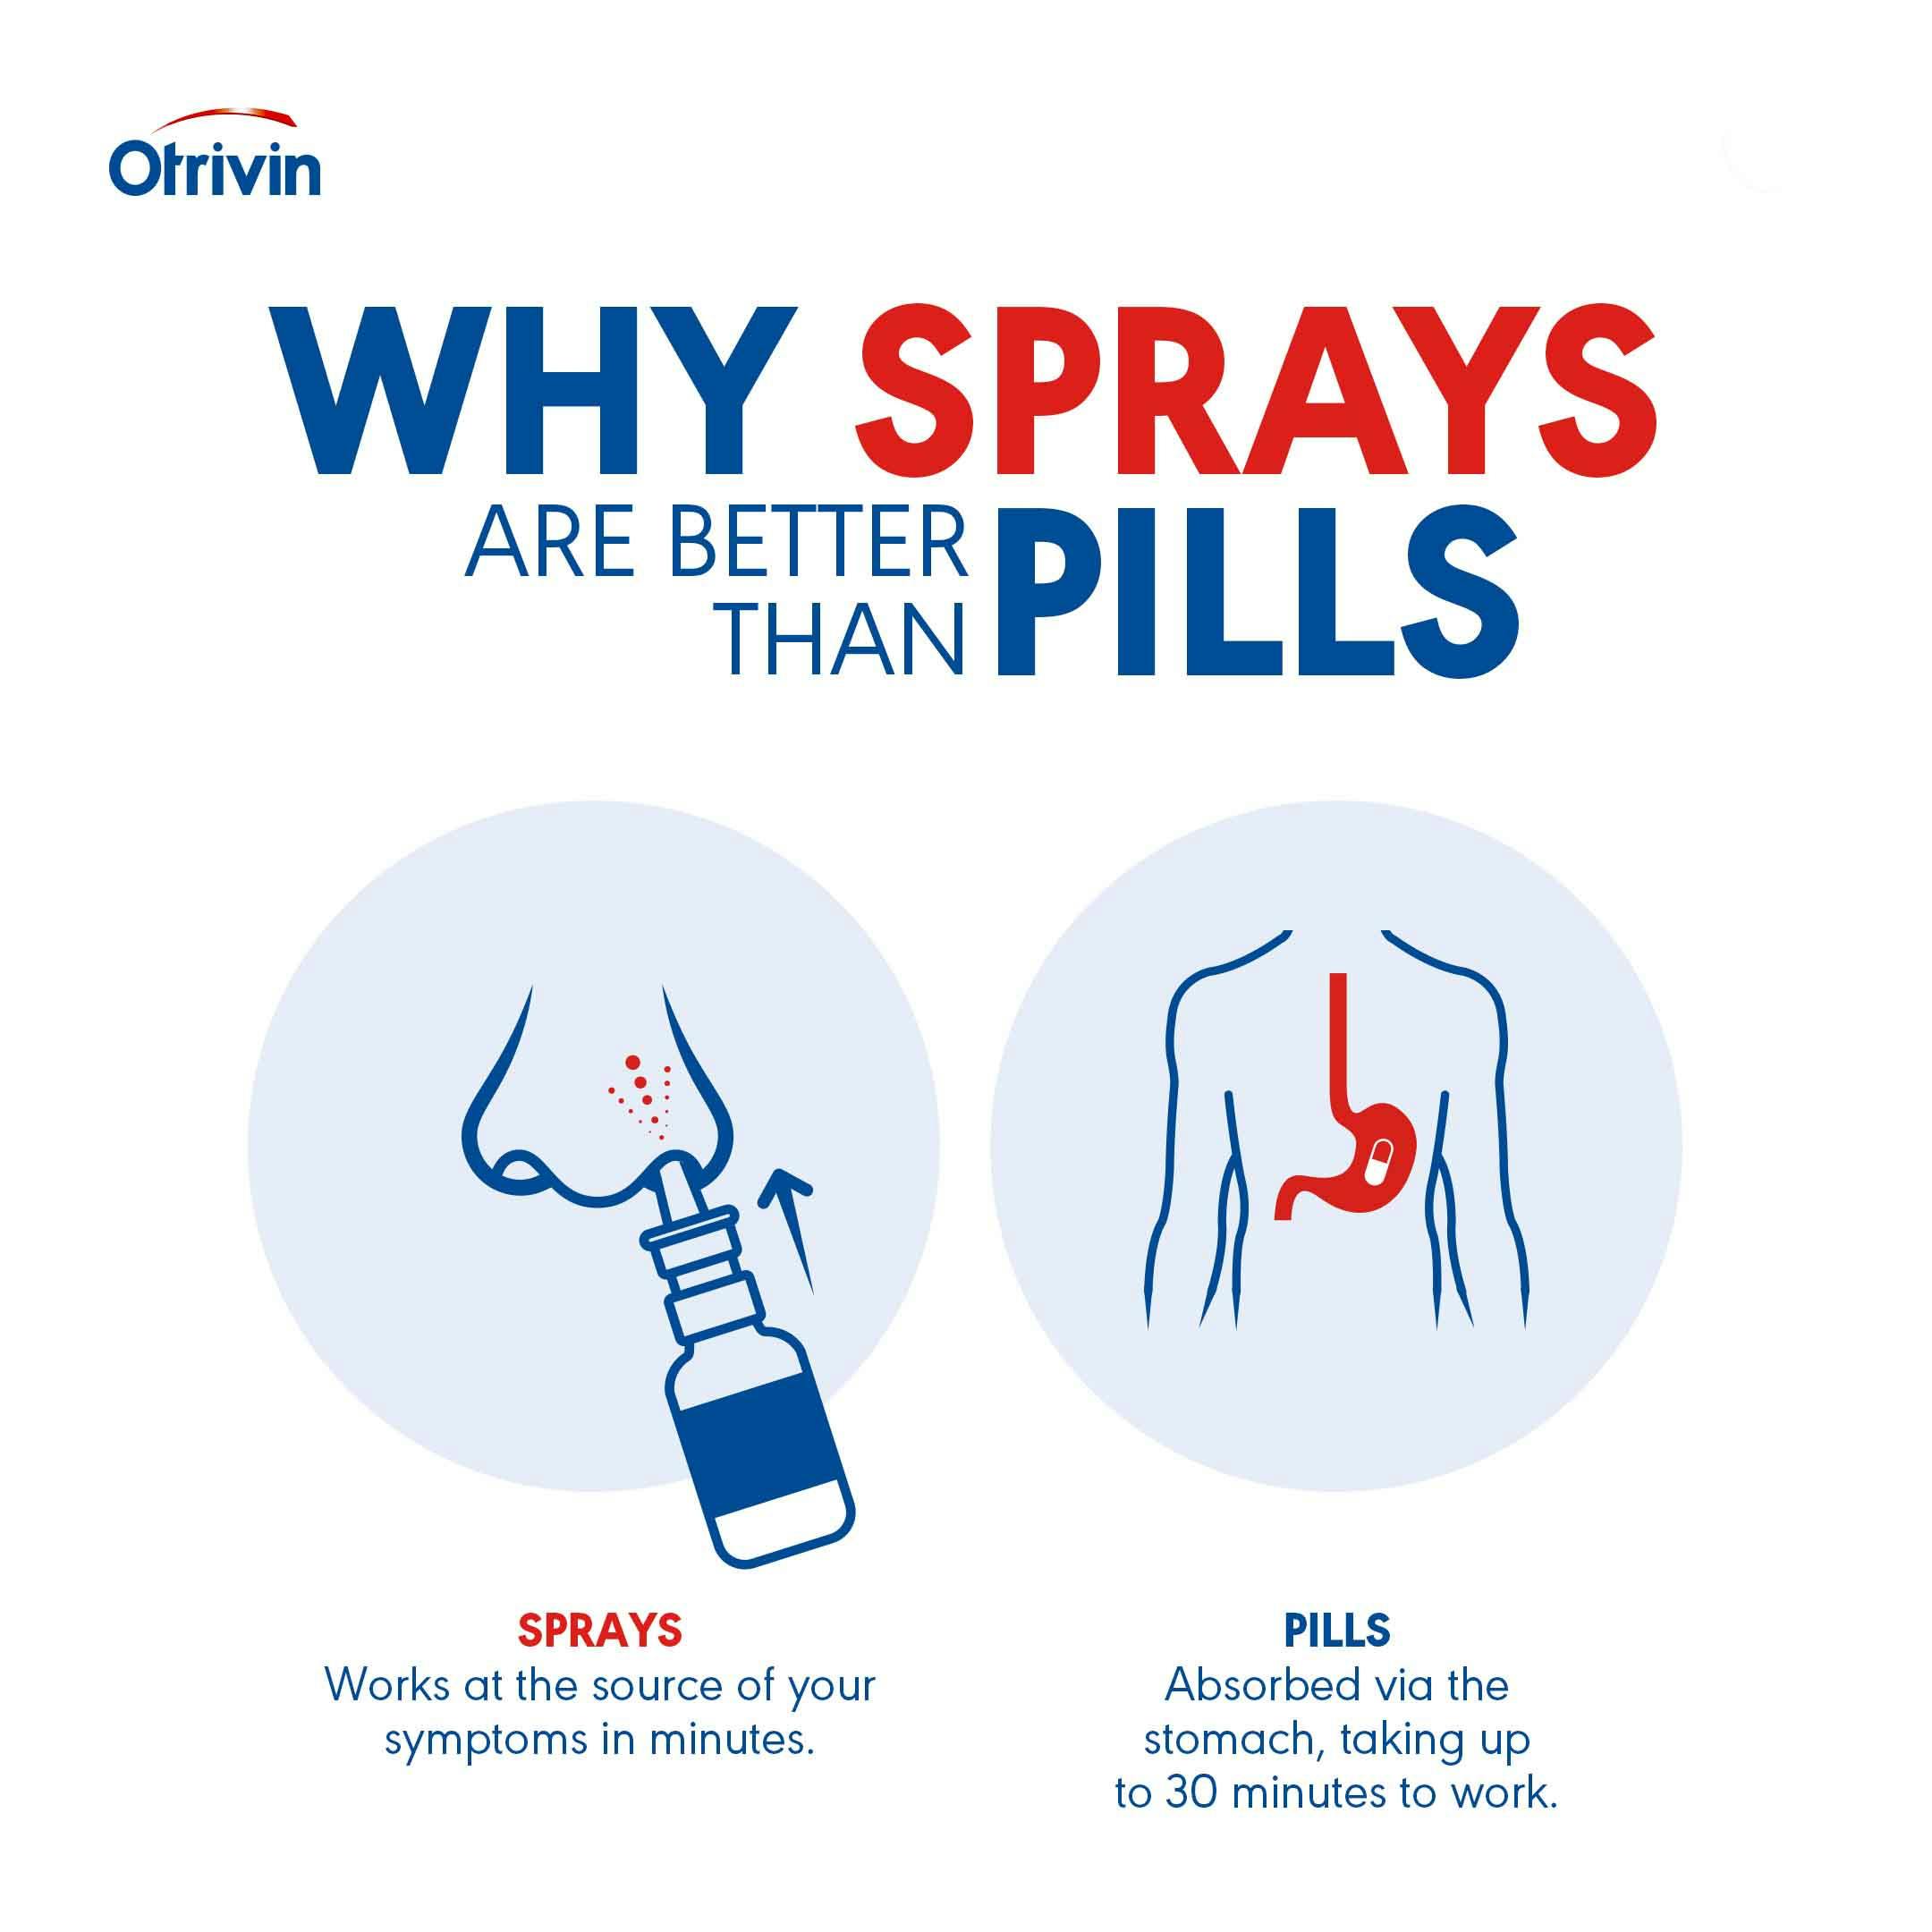 Why sprays are better than pills